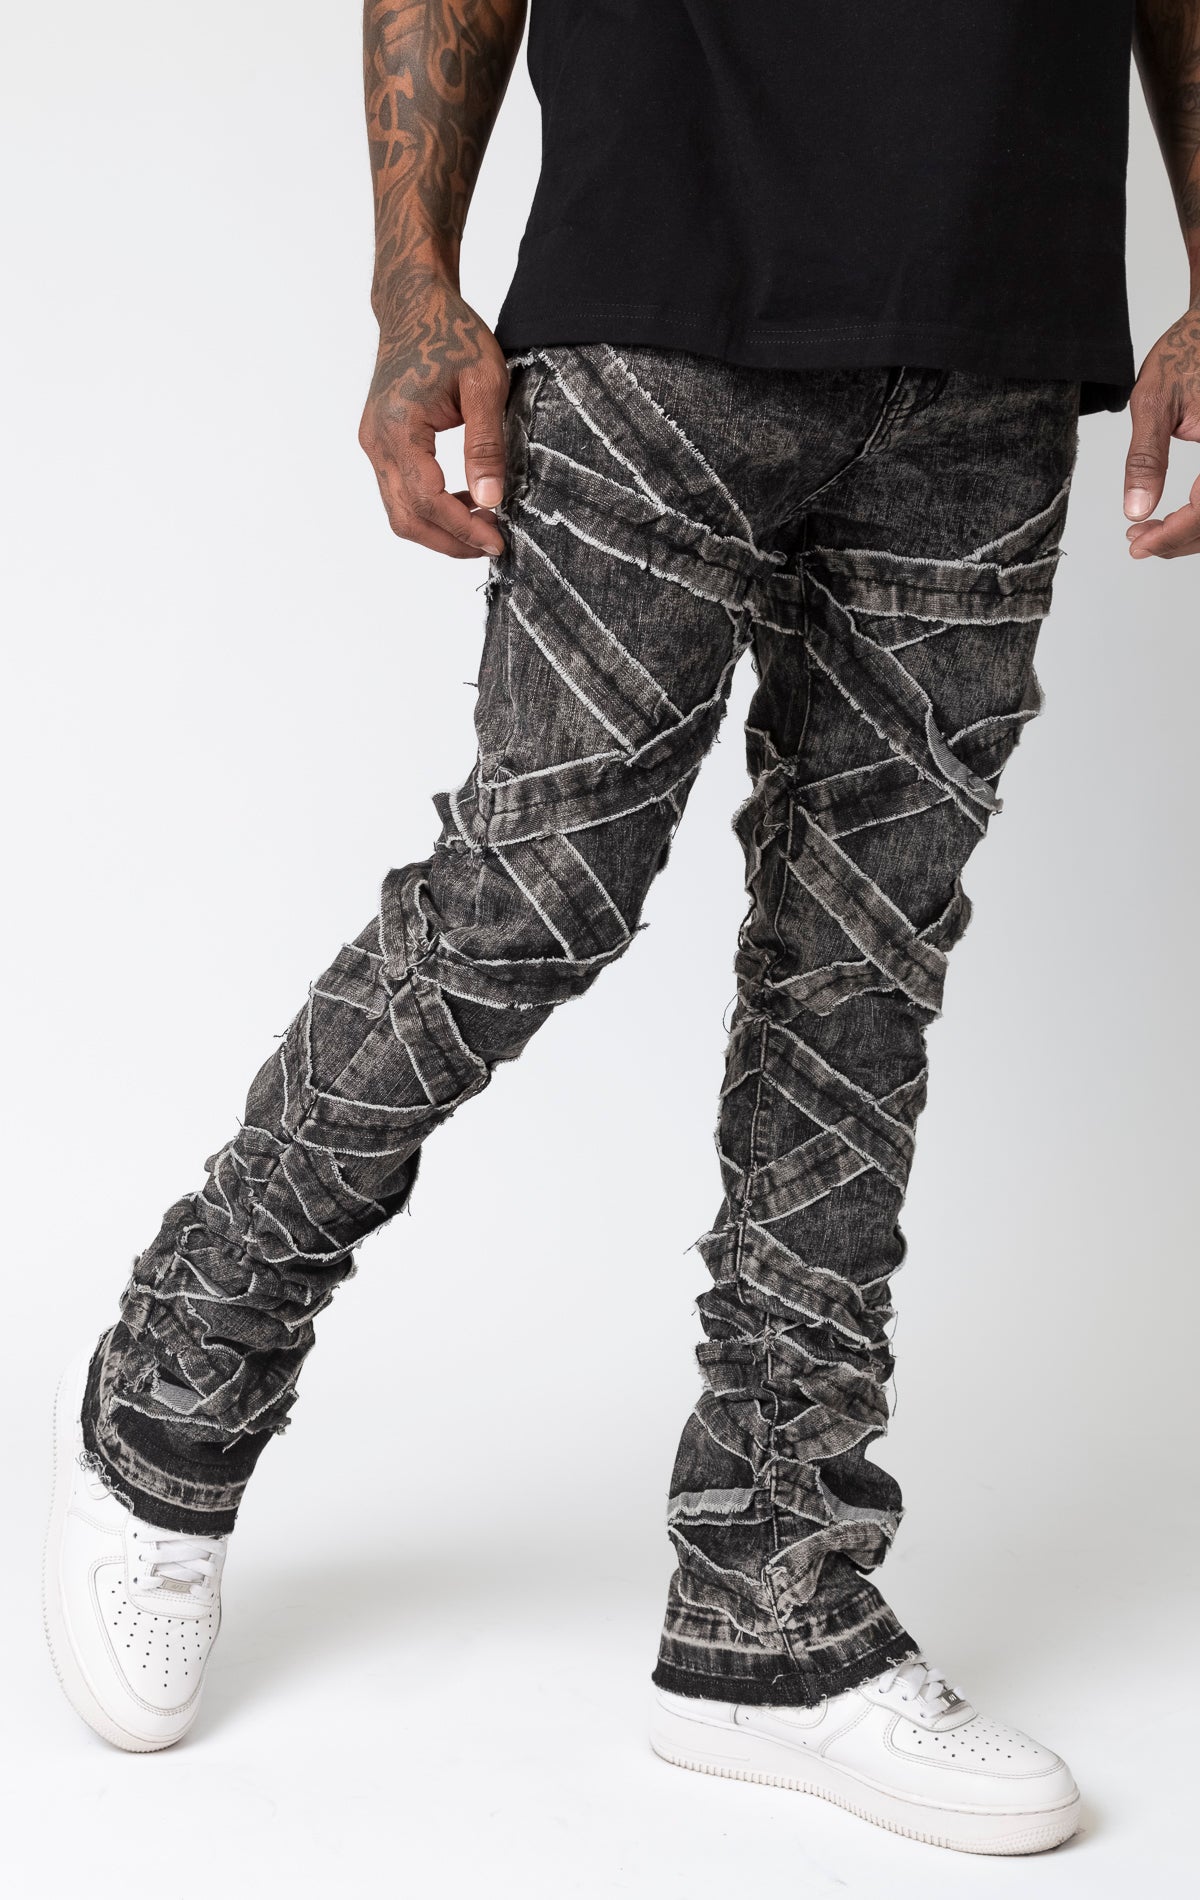 Black wash Distressed stacked jeans with a cut and sew panel construction, frayed detailing, and stretch fabric.